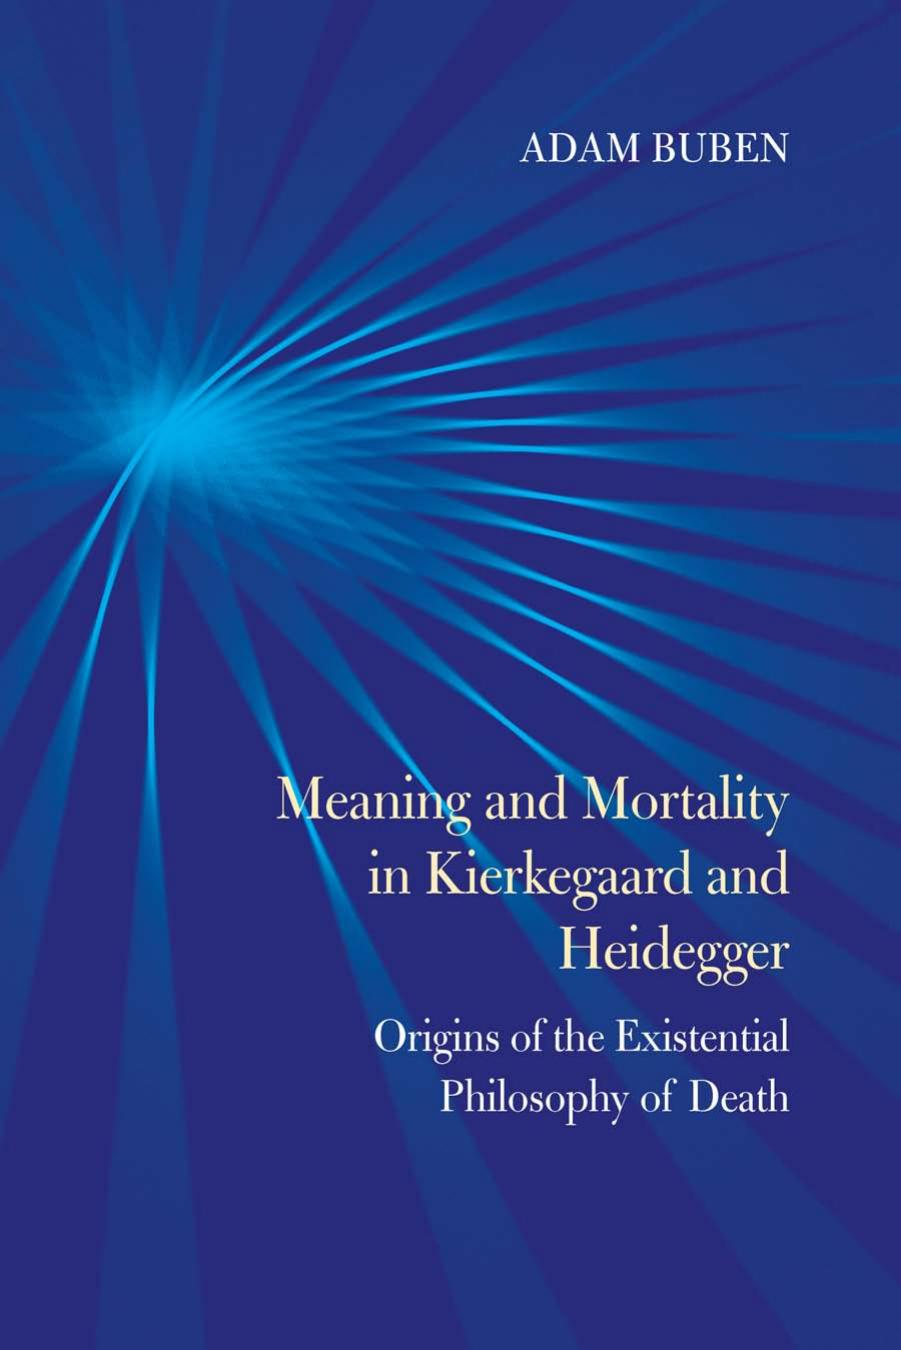 Meaning and Mortality in Kierkegaard and Heidegger: Origins of the Existential Philosophy of Death